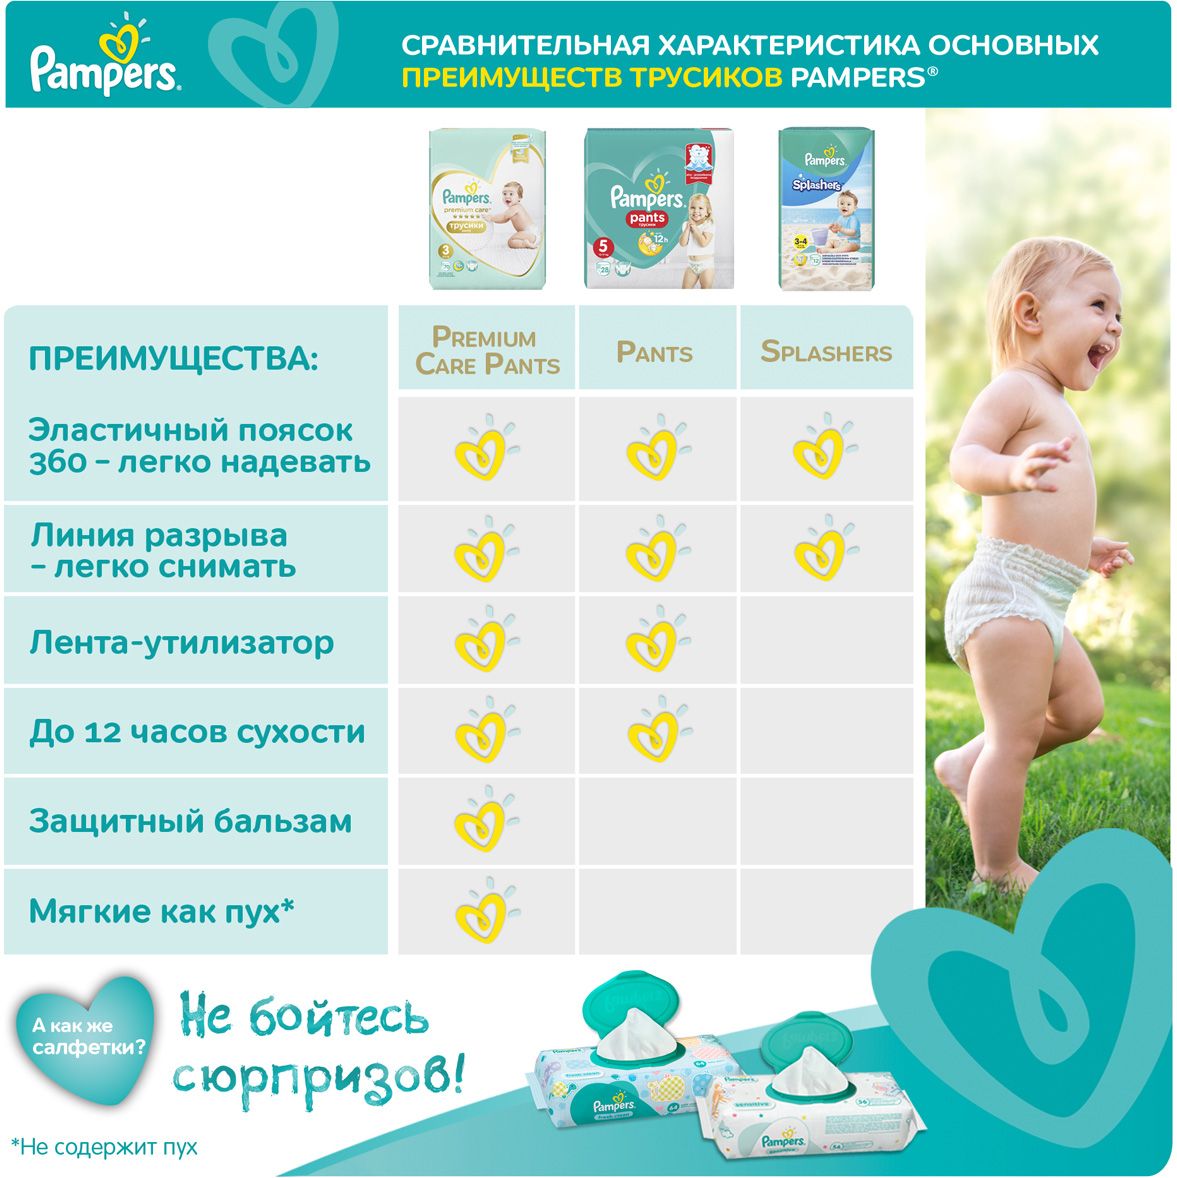 Pampers  Pants 12-17  ( 5) 152 